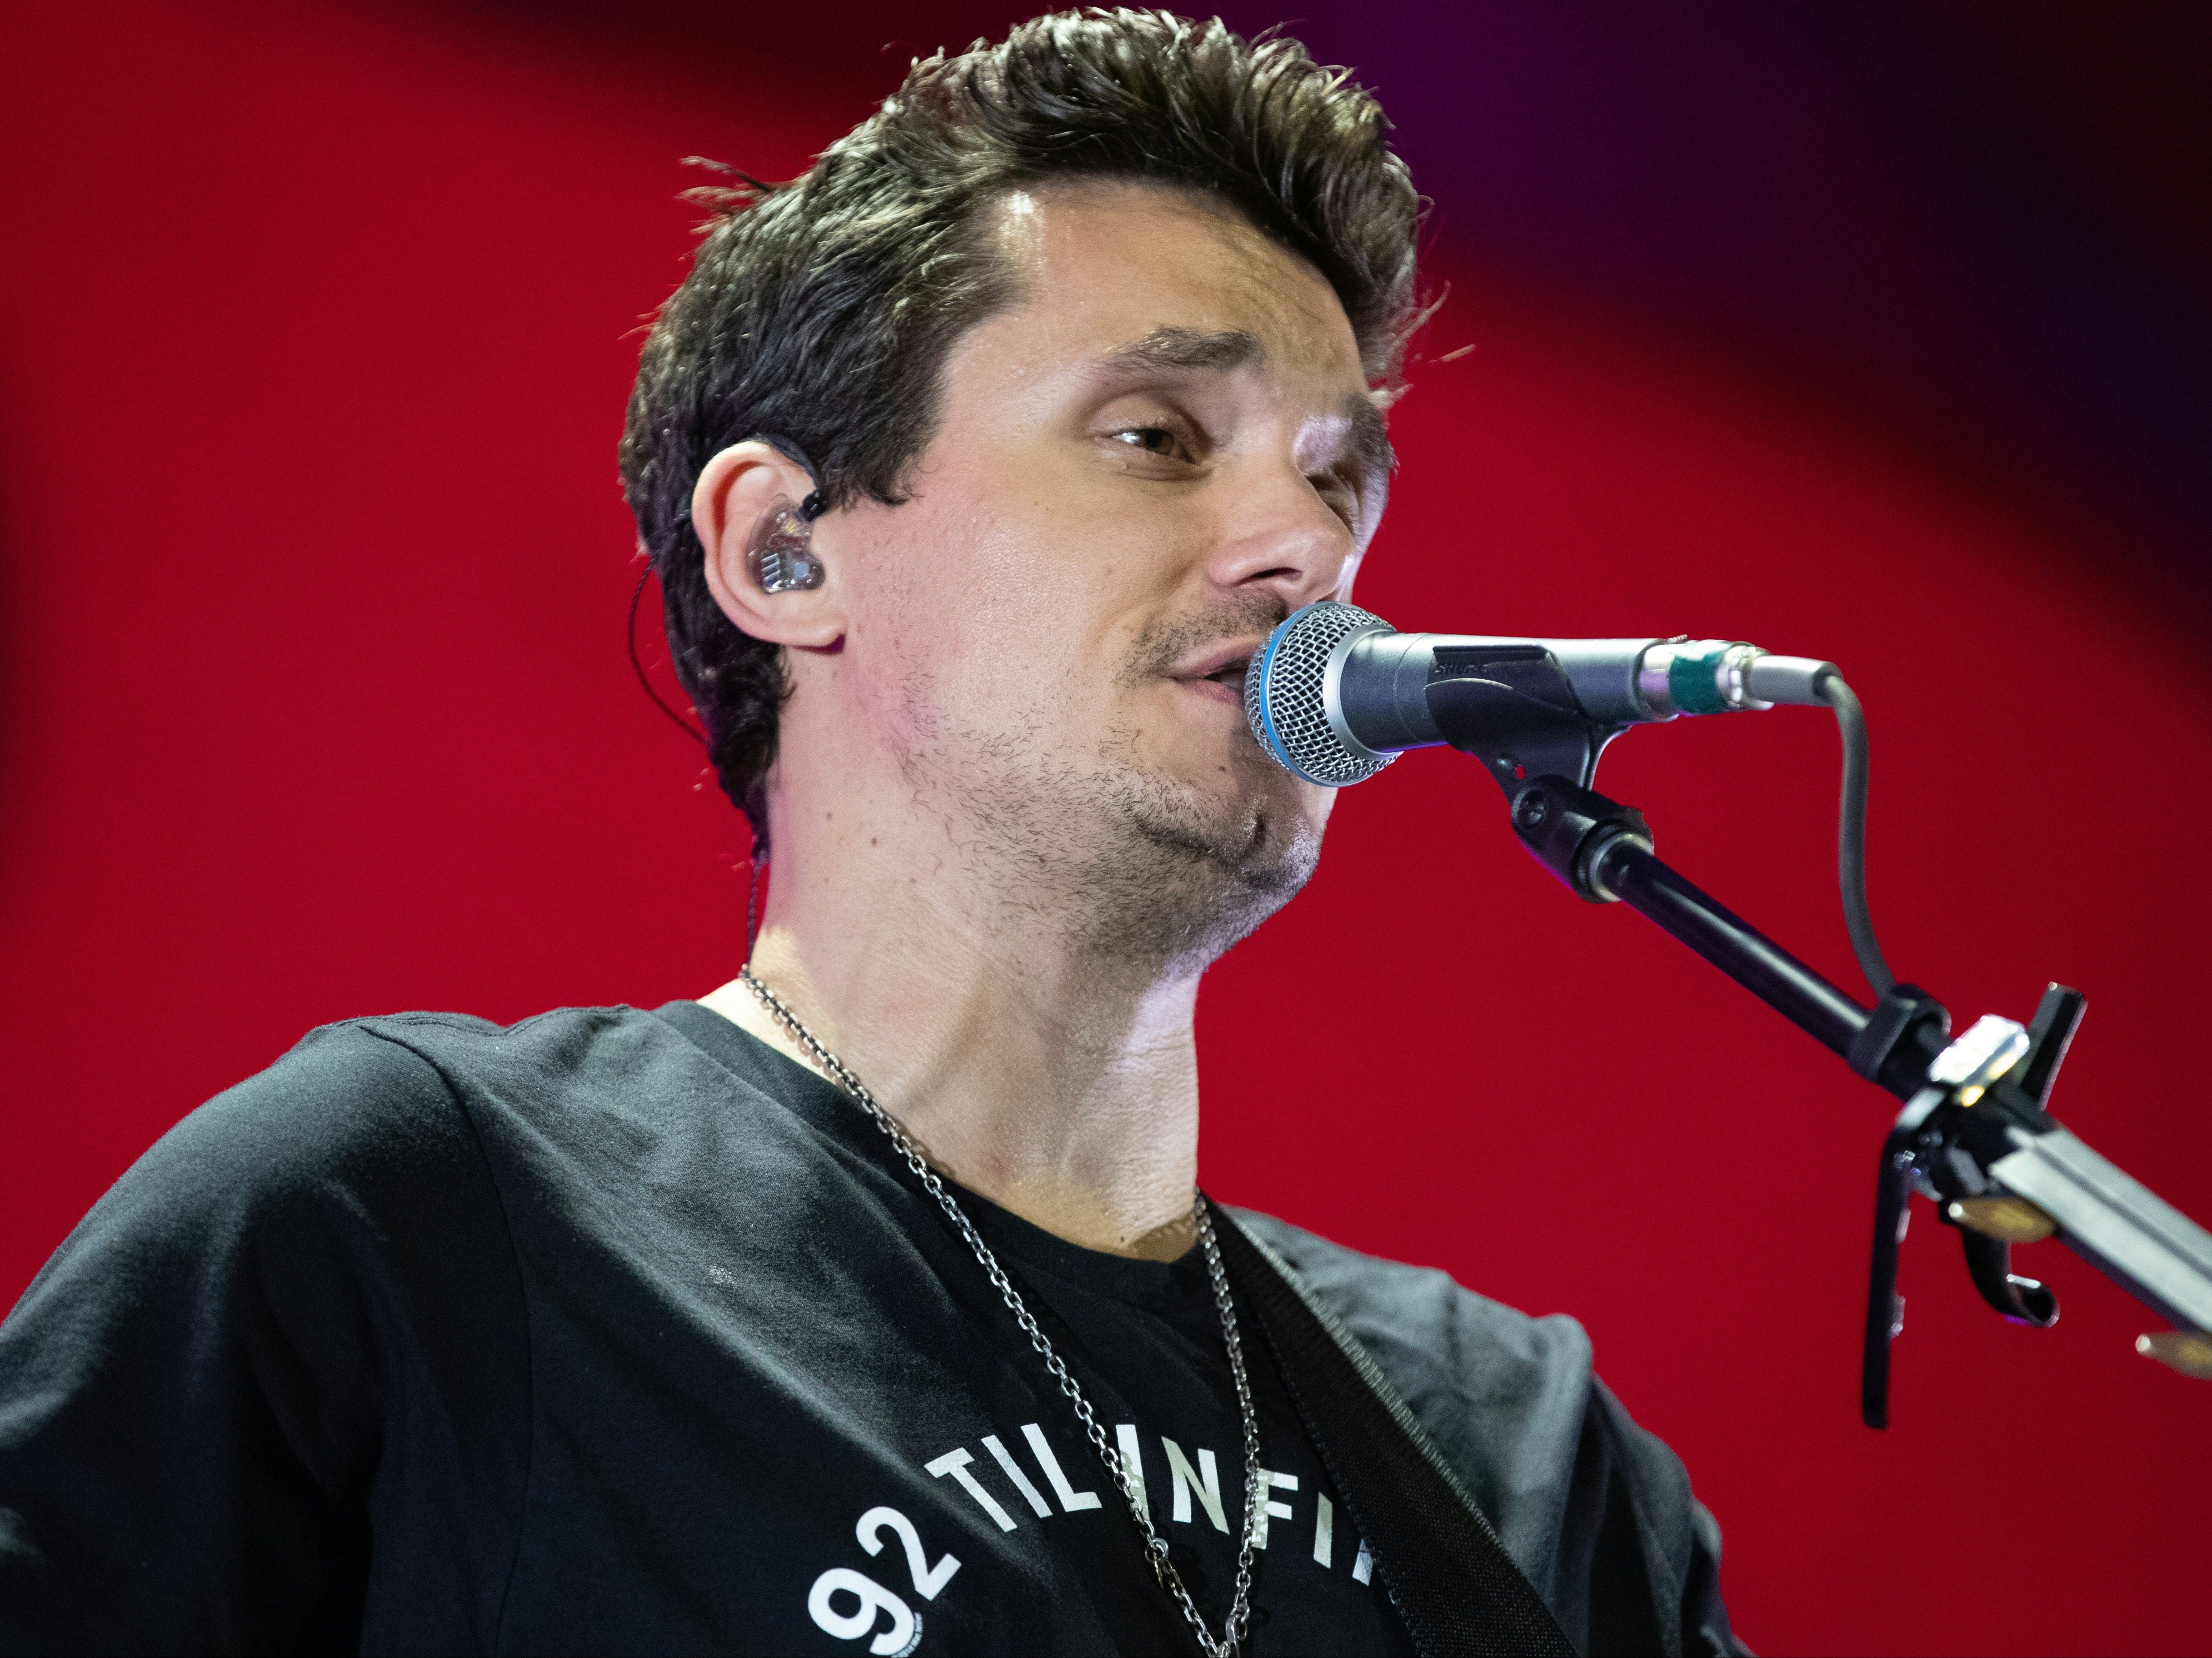 Mayer on stage in September 2019